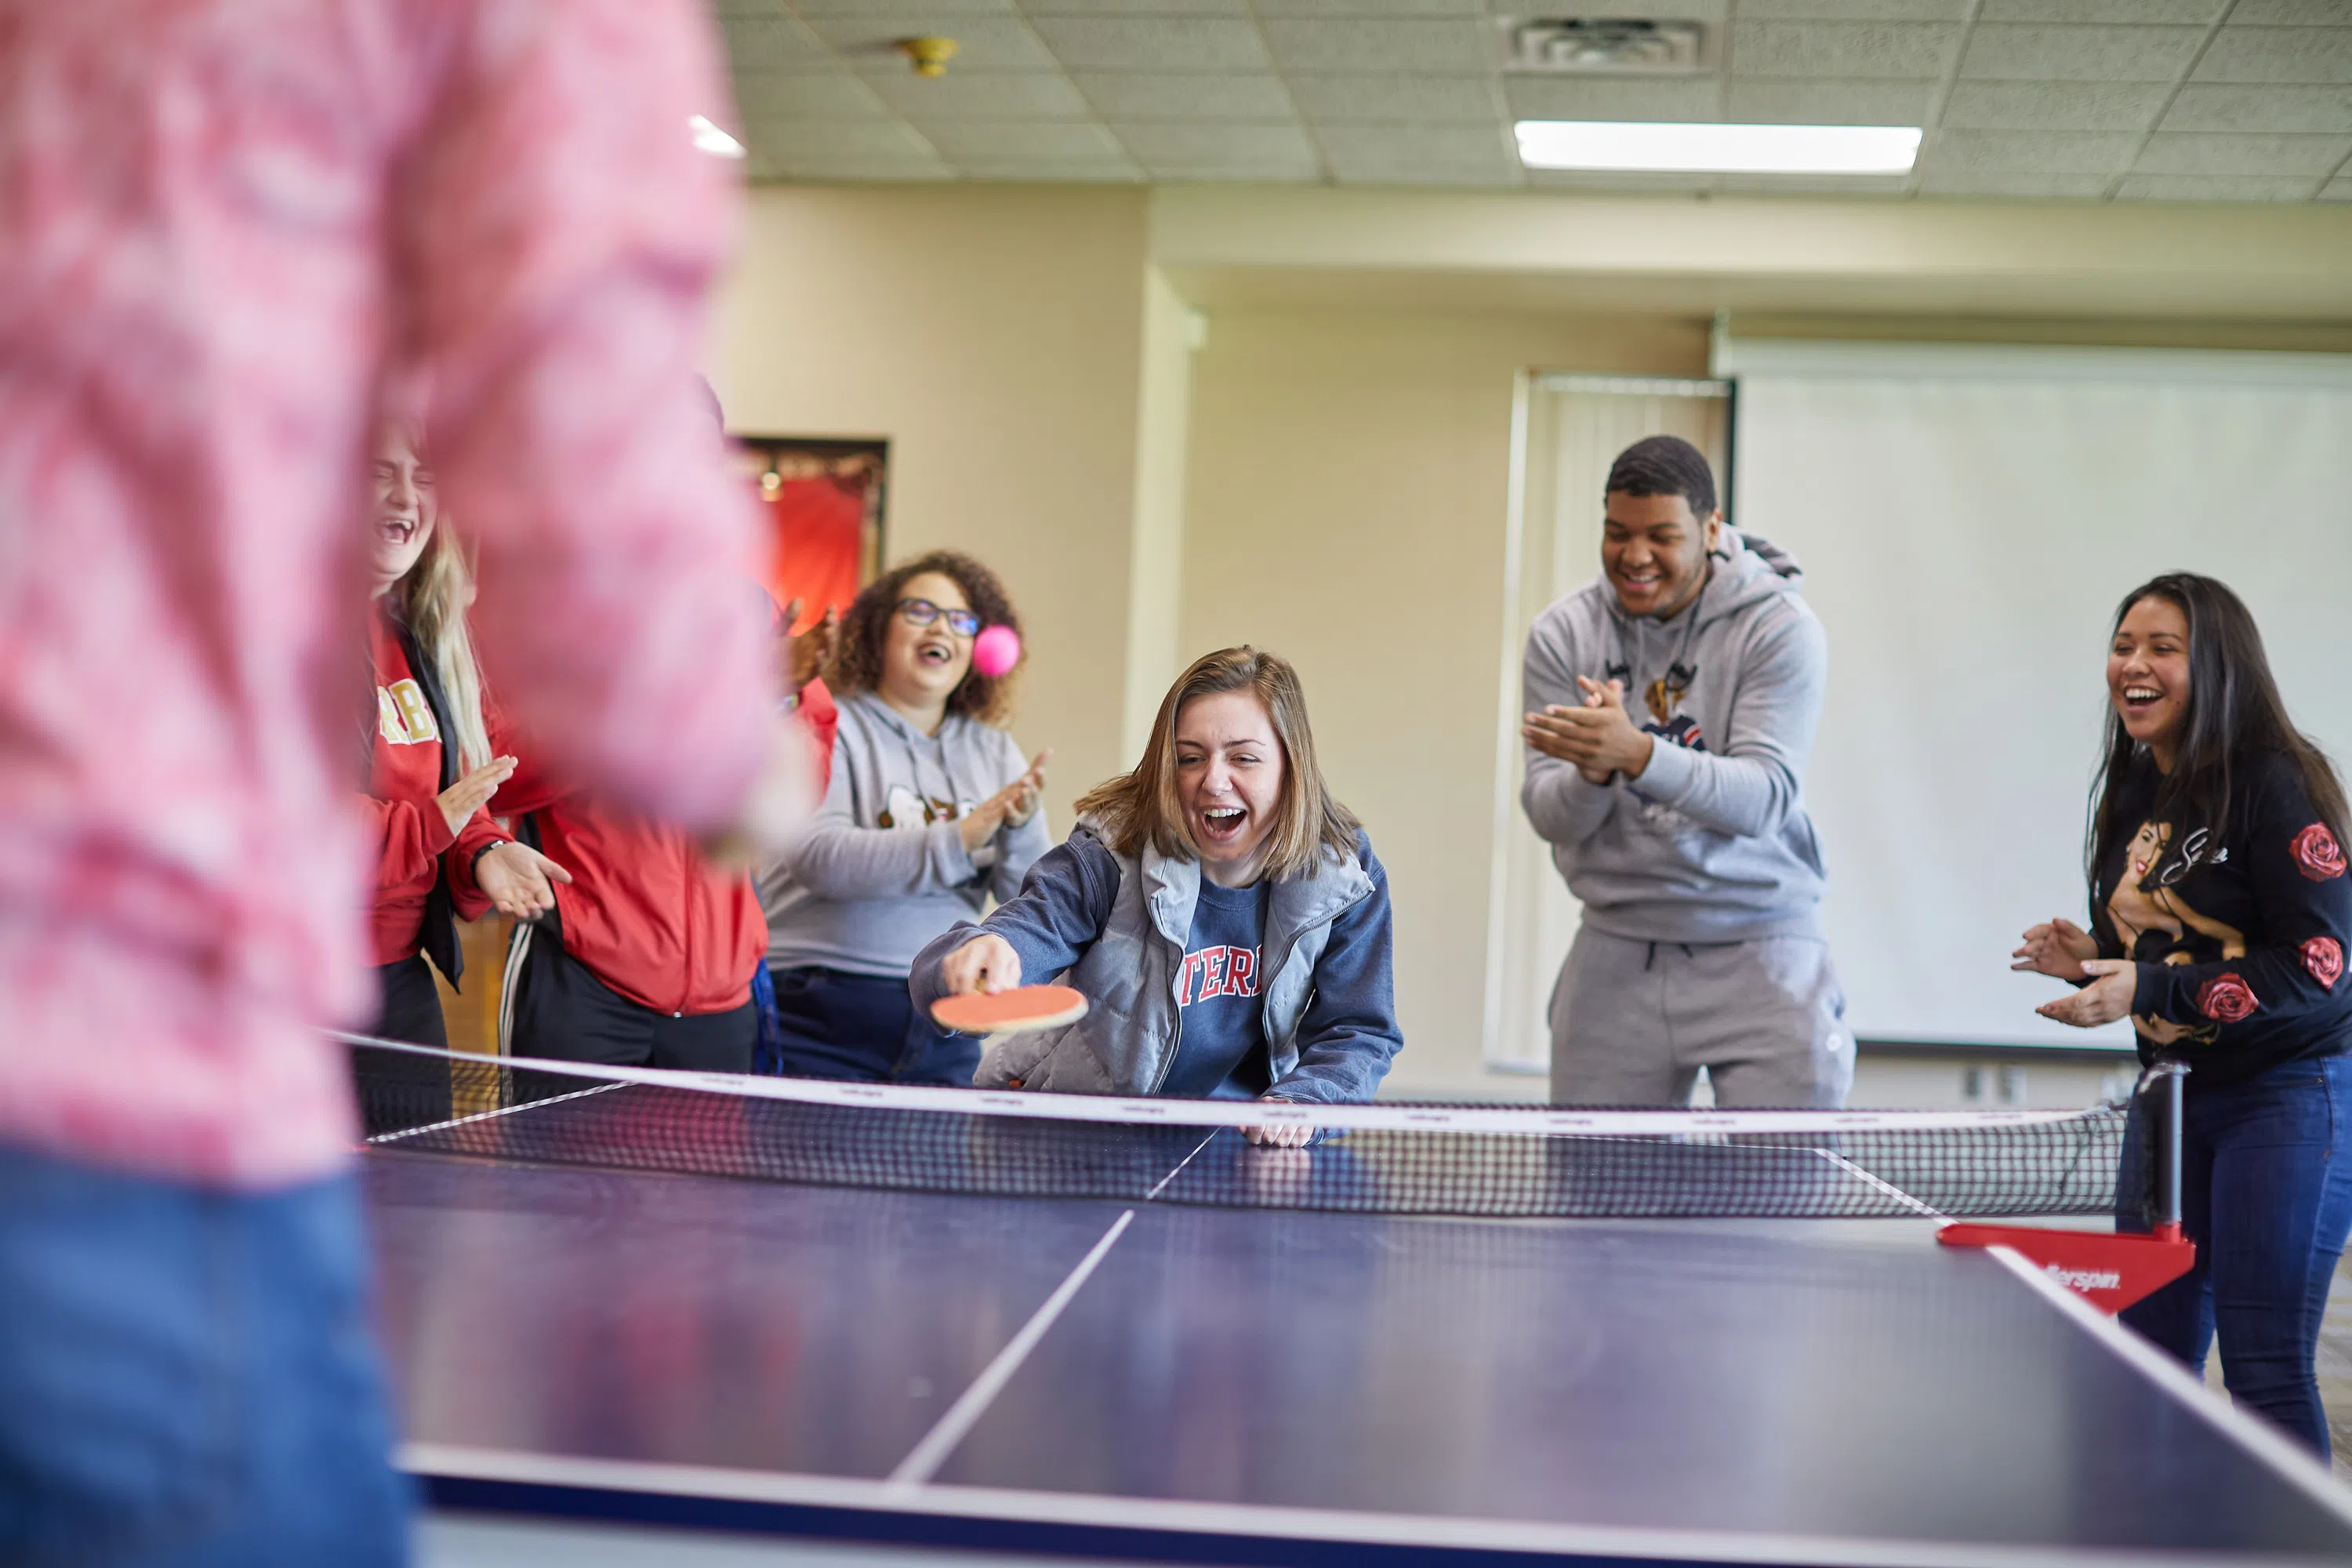 A diverse group of students play ping pong at the Campus Center